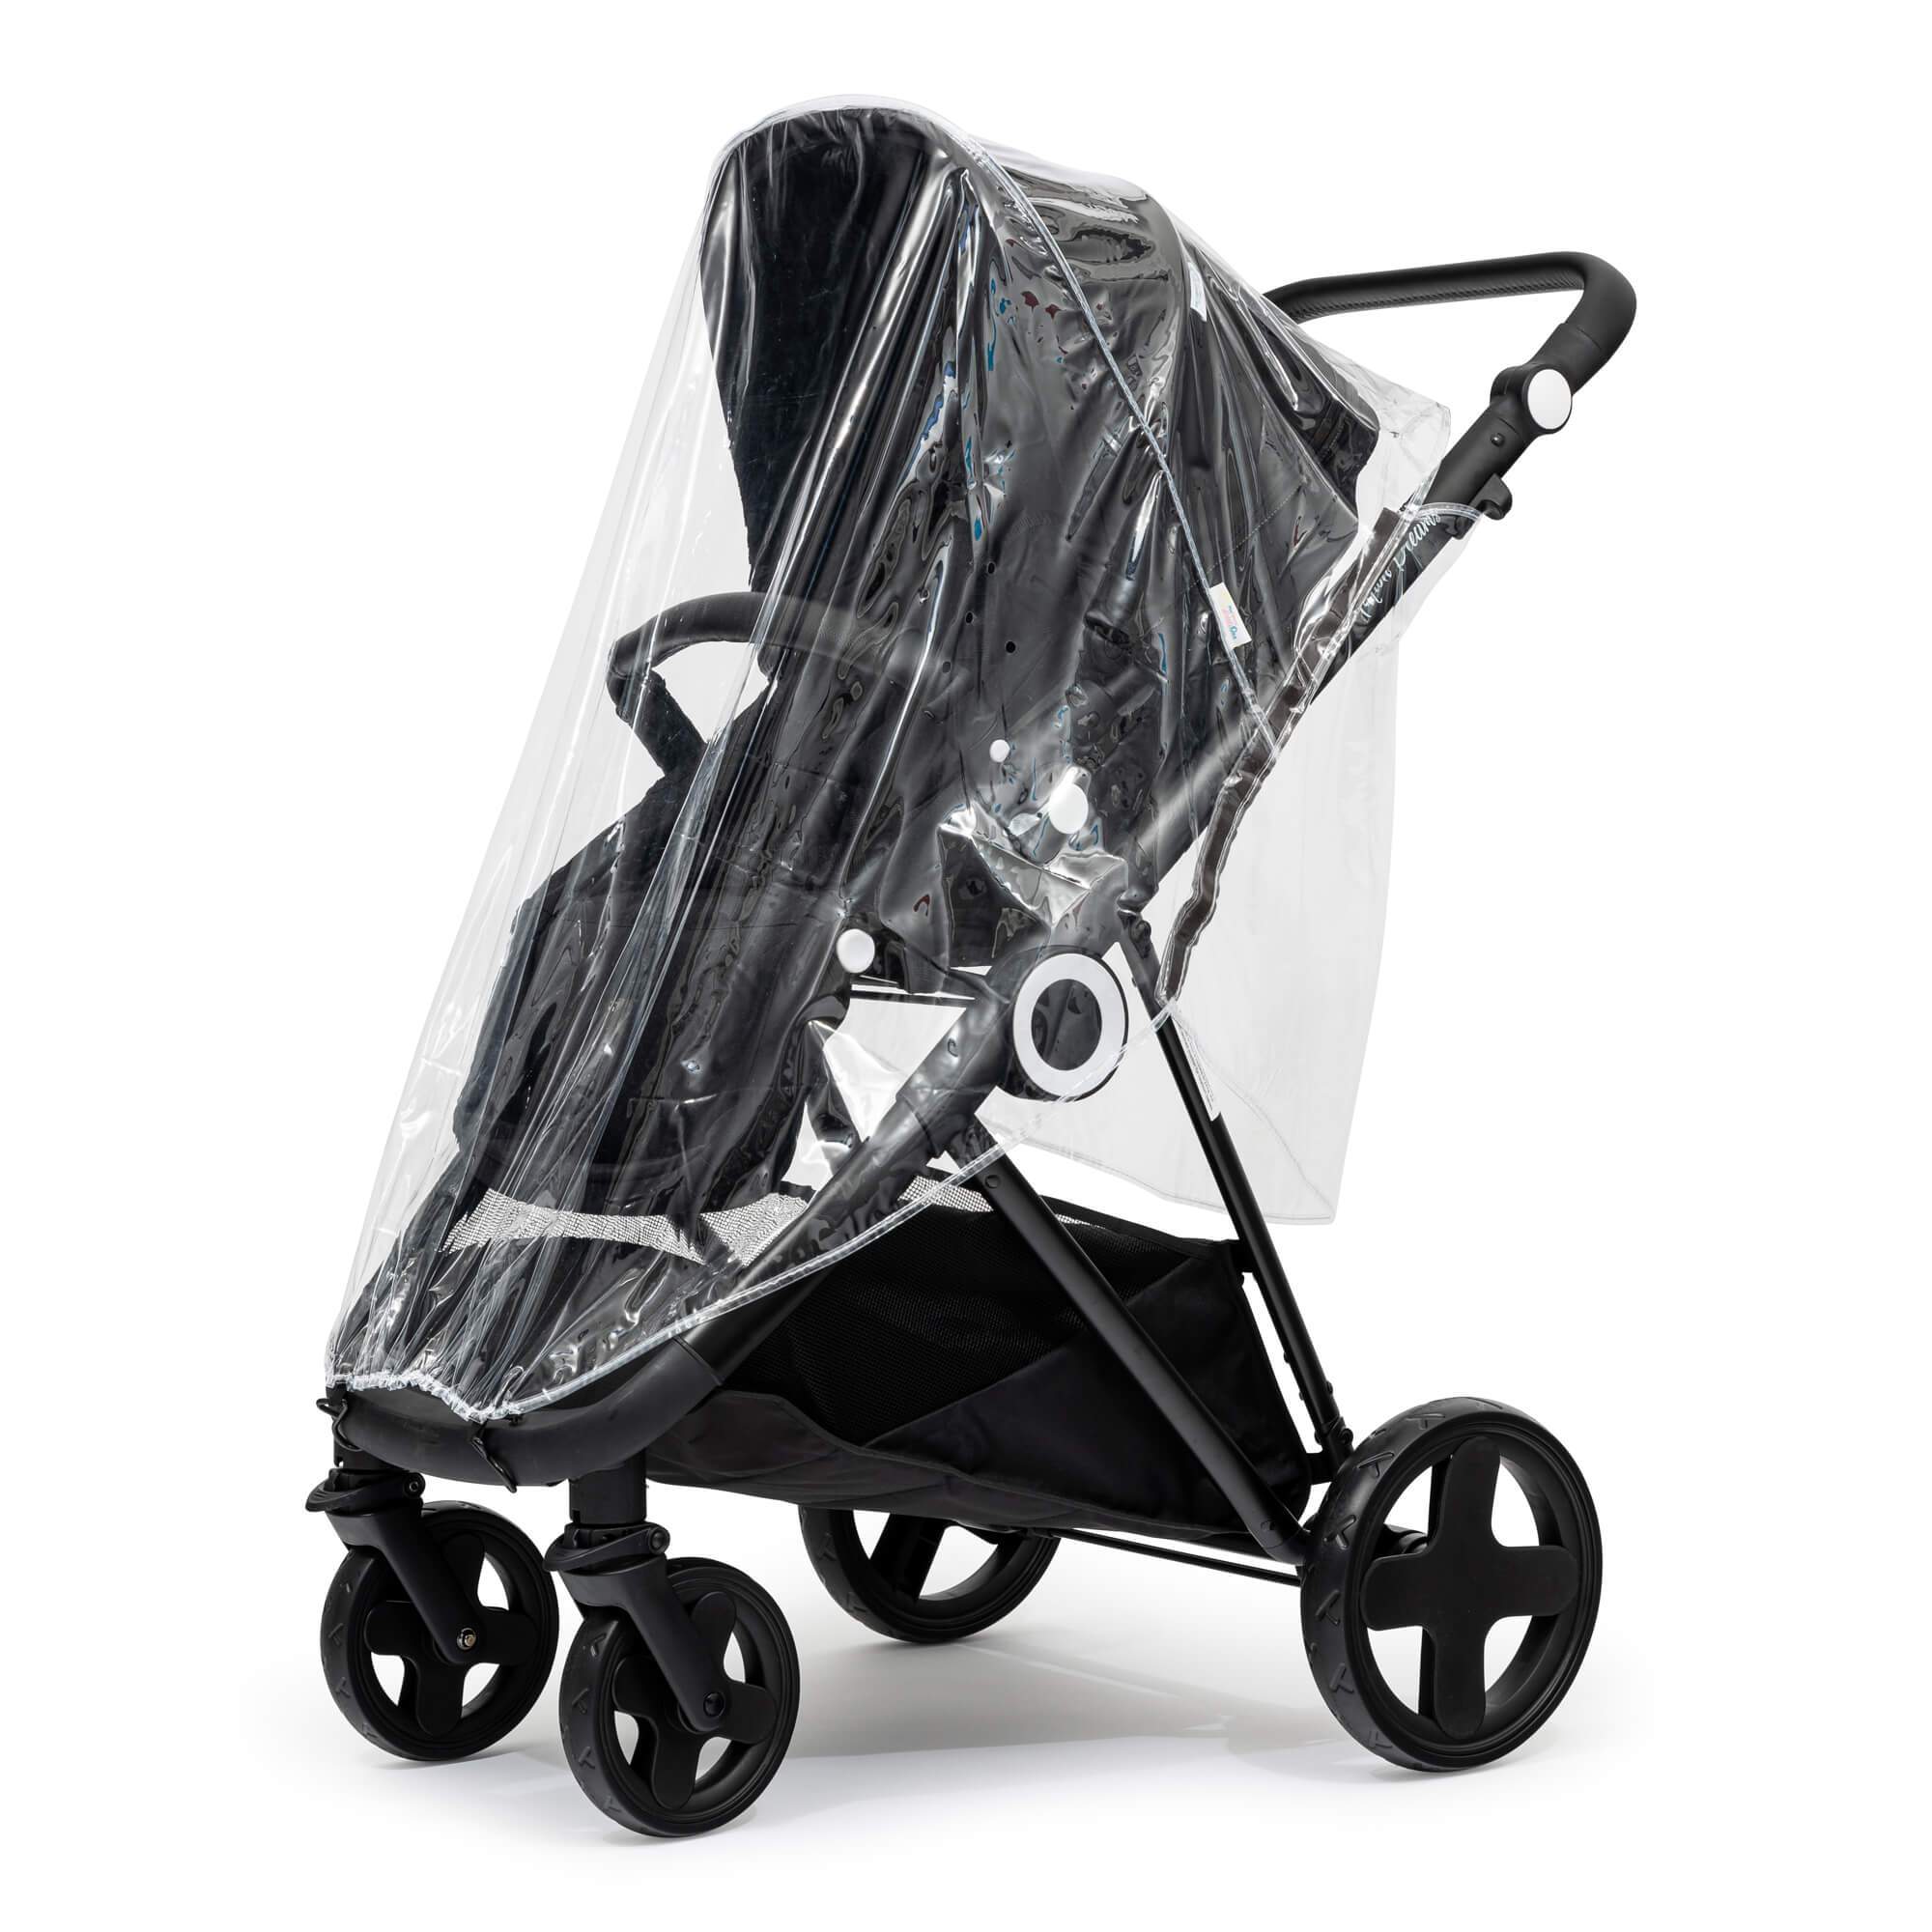 Pushchair Raincover Compatible With Babylo - For Your Little One